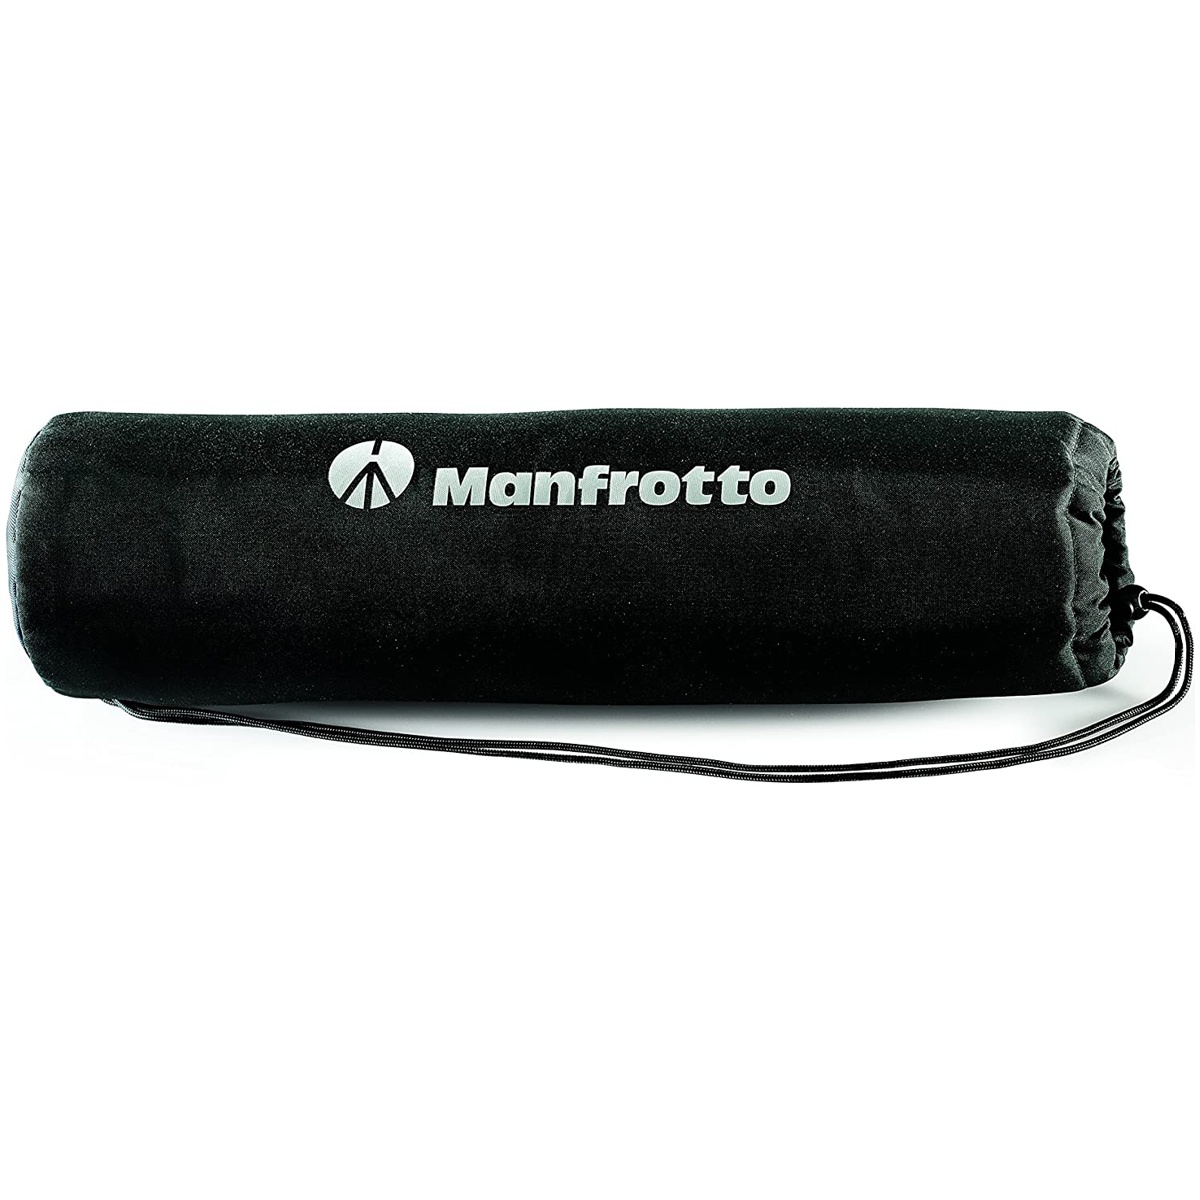 Manfrotto Compact Action 